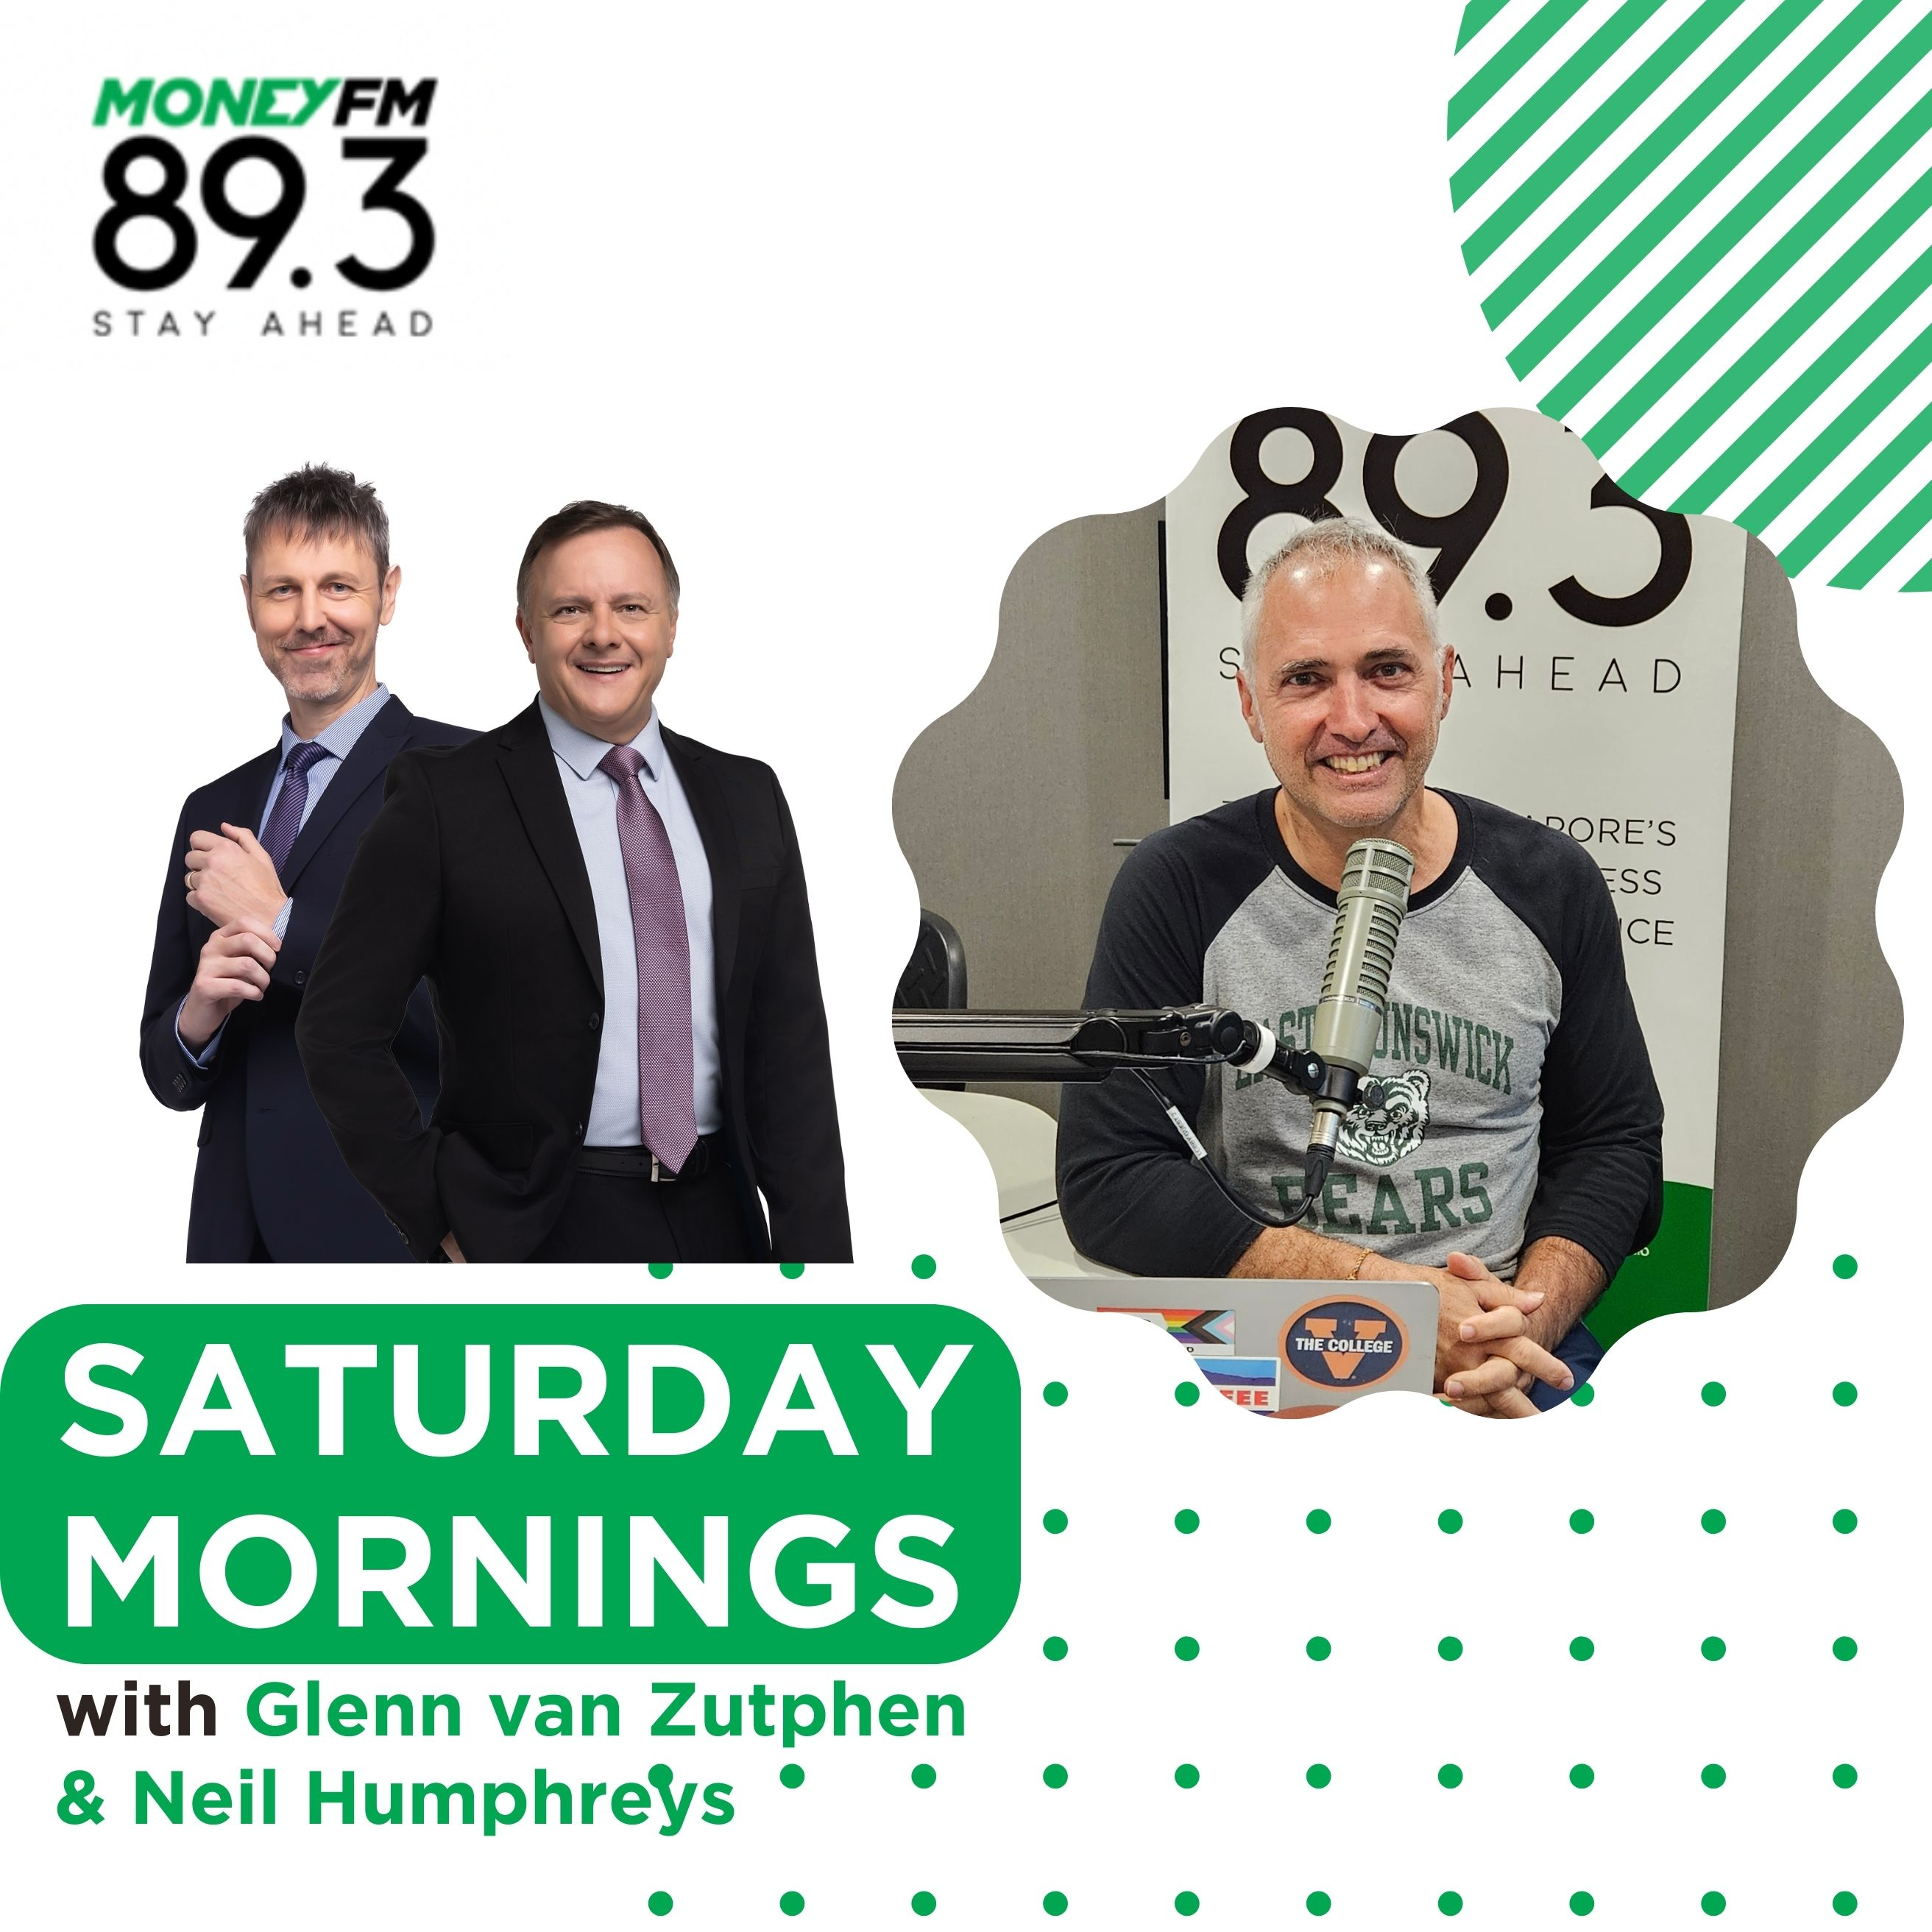 Saturday Mornings: International News Review - Steve Okun on the Xi/Biden Summit, APEC and IPEF Results, and David Cameron is Back in Politics